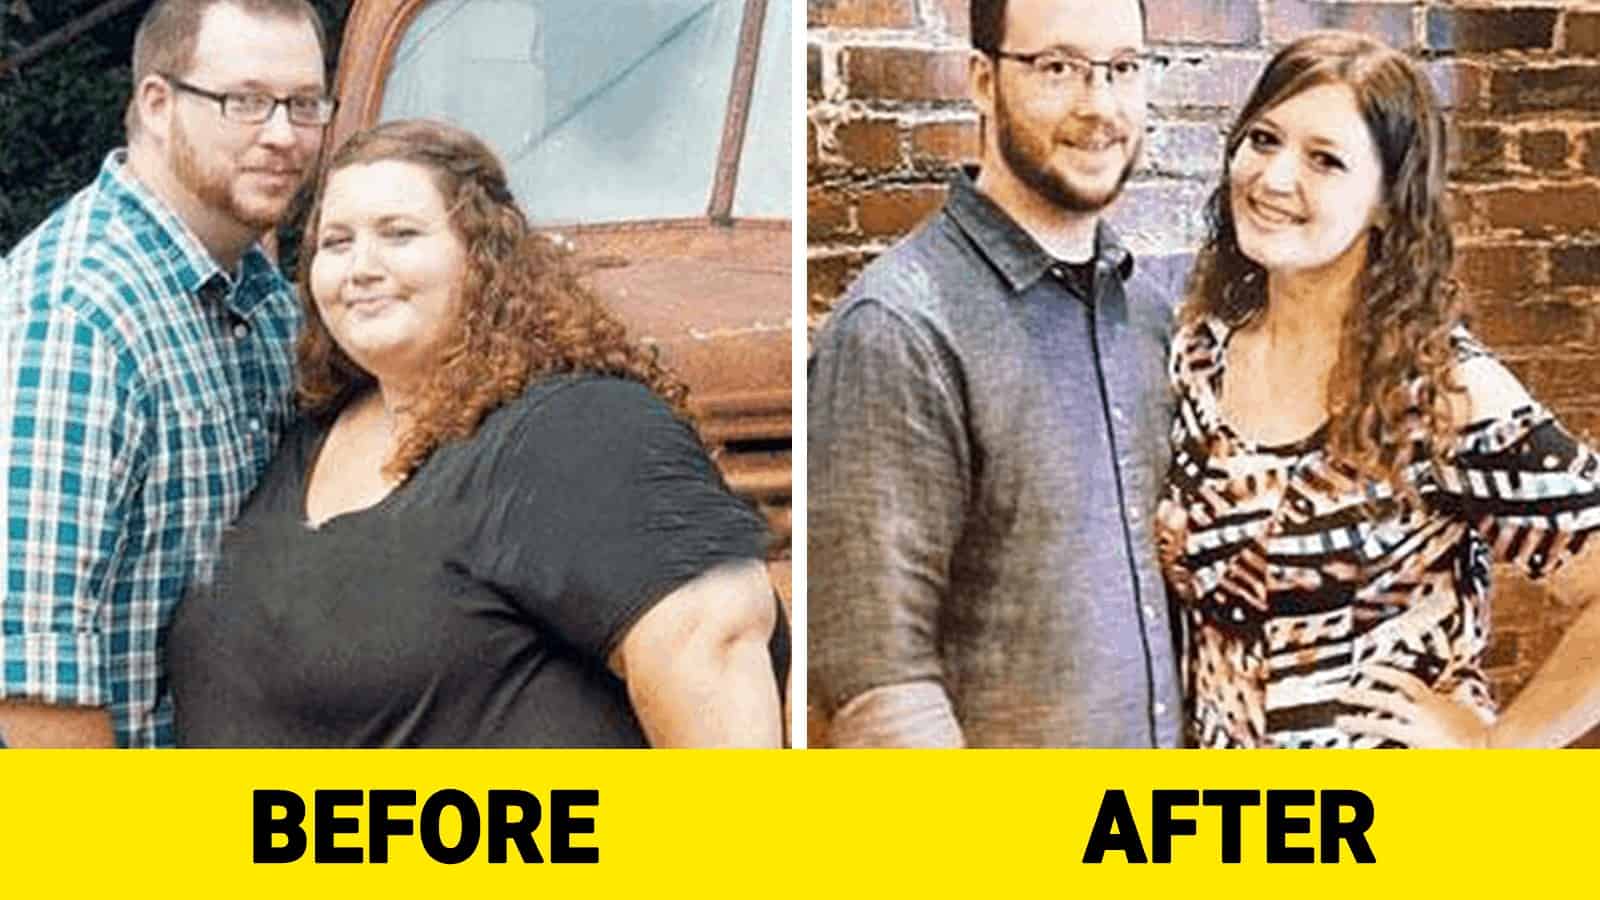 15 Inspiring Before And After Weight Loss Photos of Couples Who Transformed Their Bodies